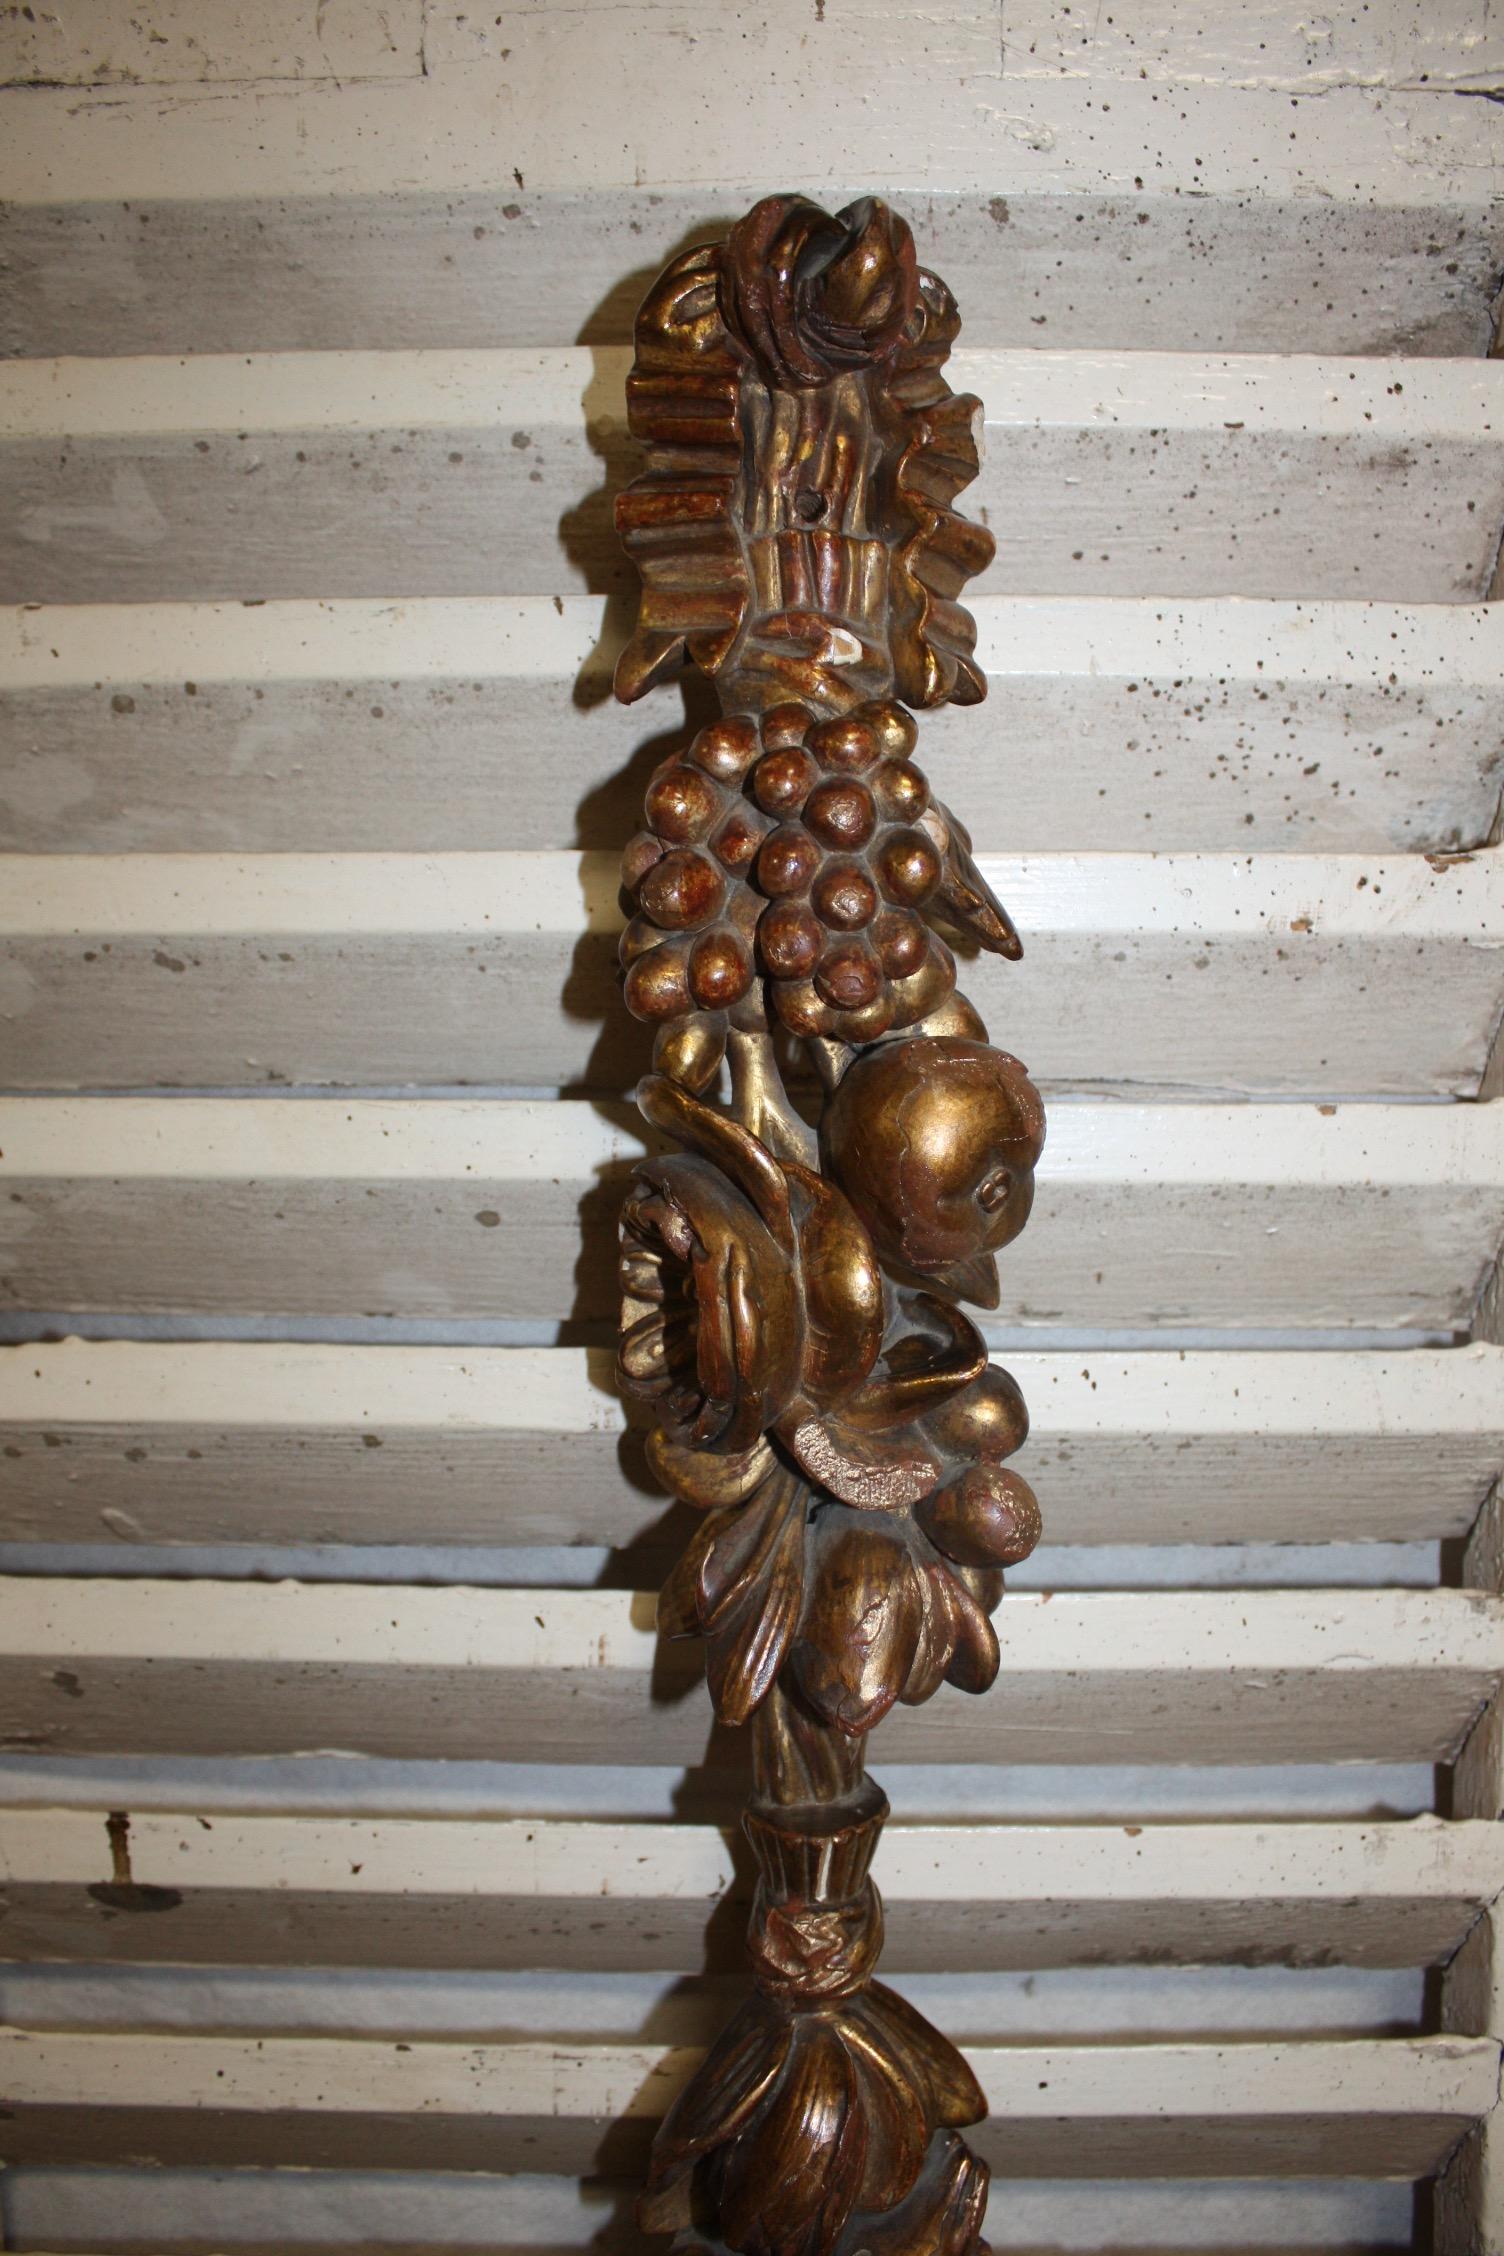 Early 20th Century French Wall Gilt Wood Ornament In Good Condition For Sale In Stockbridge, GA